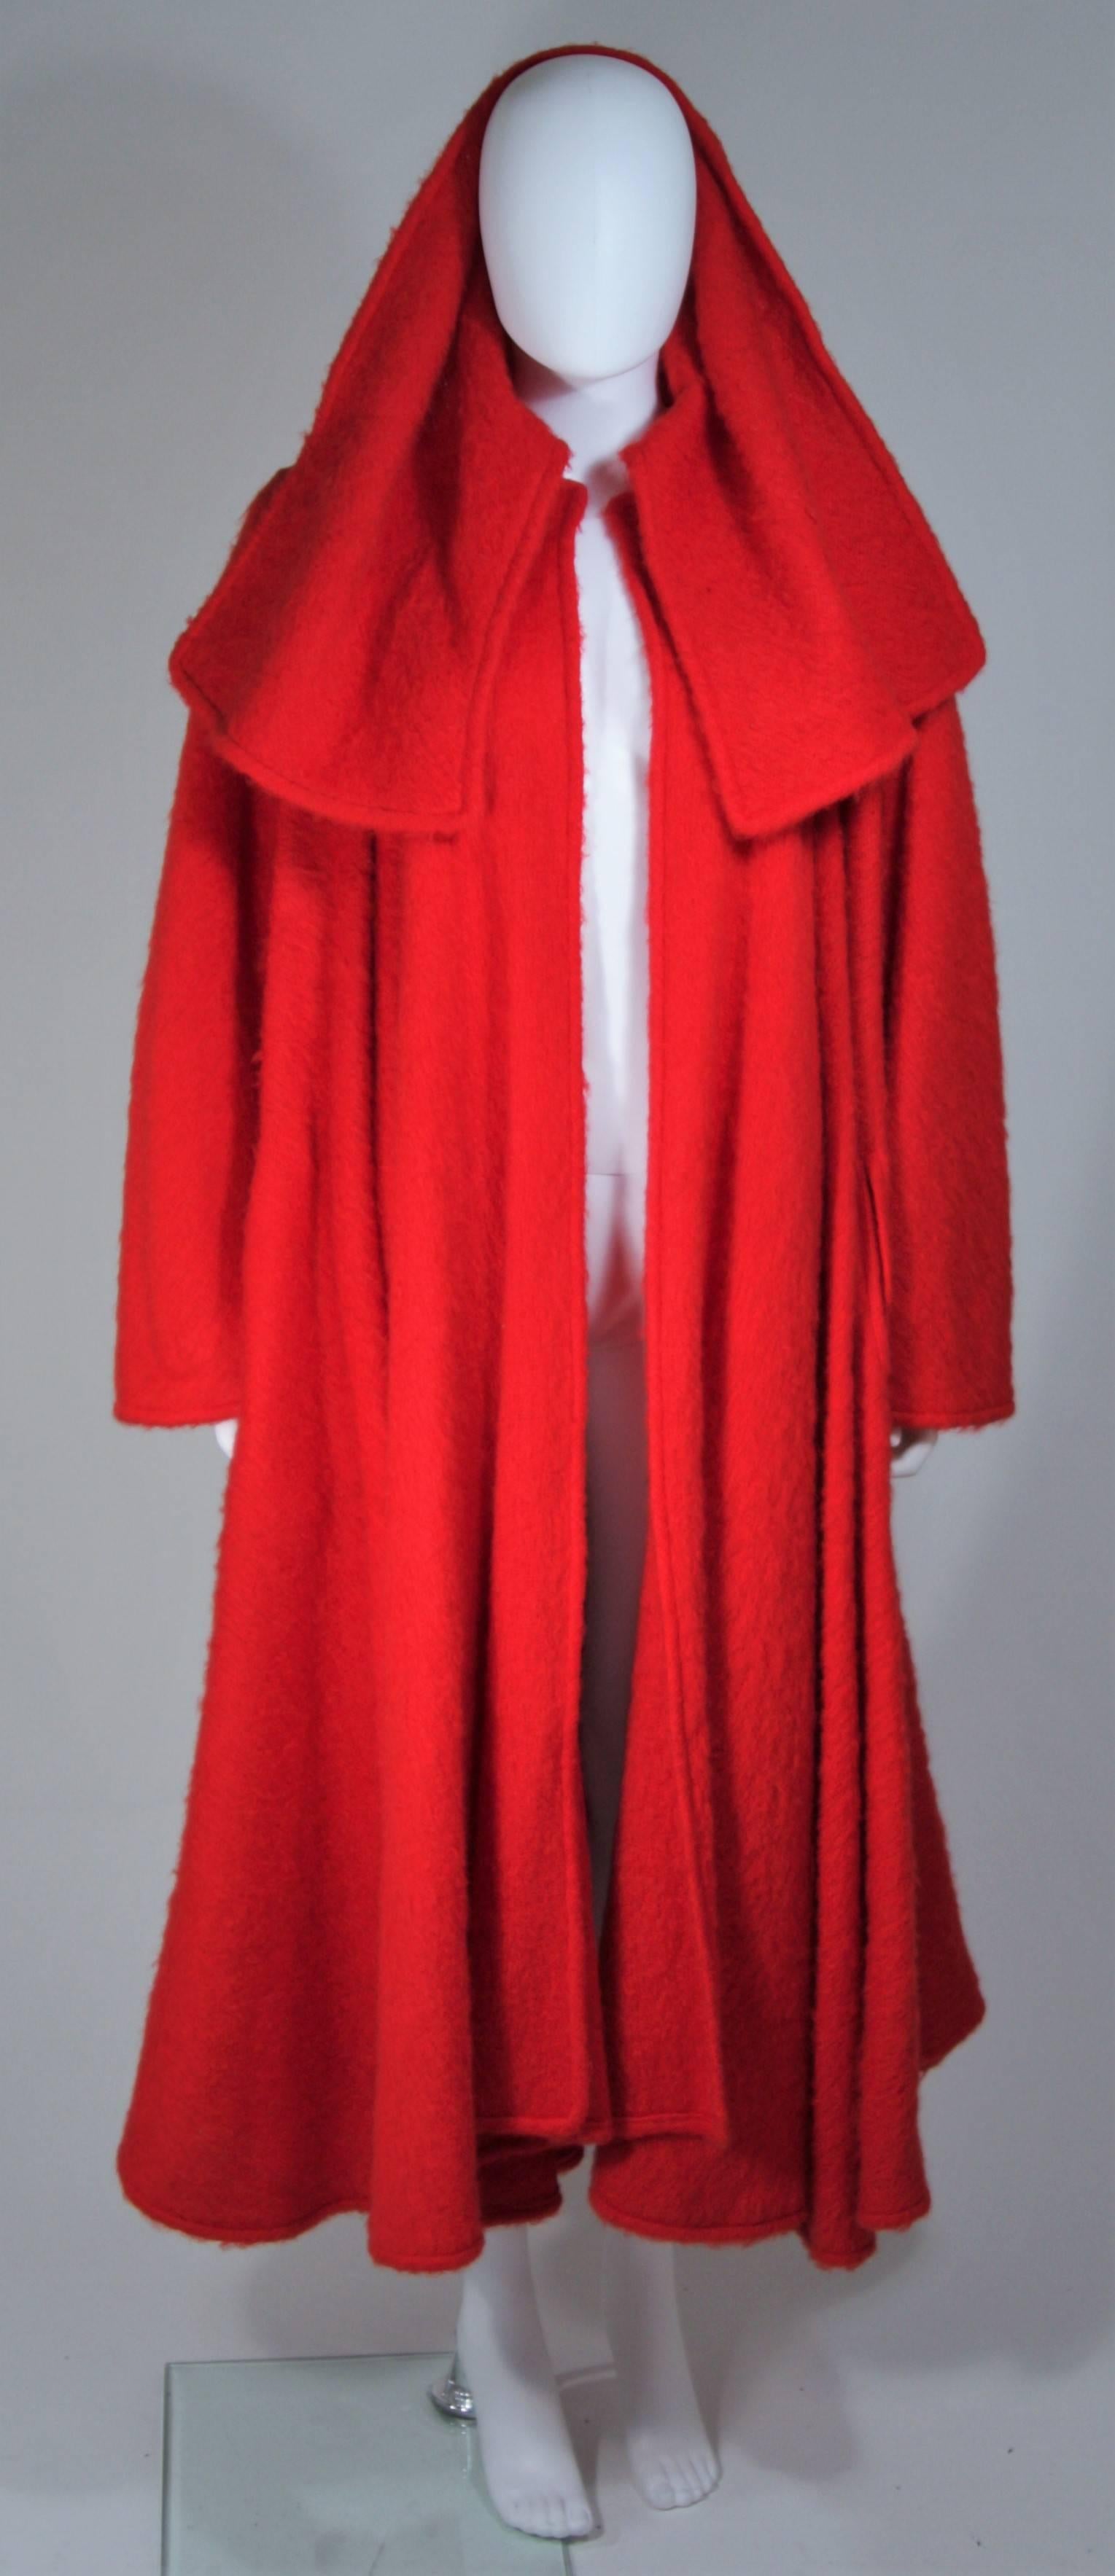 Women's VALENTINO Circa 1980's Dramatic Red Mohair Coat with Draped Collar 